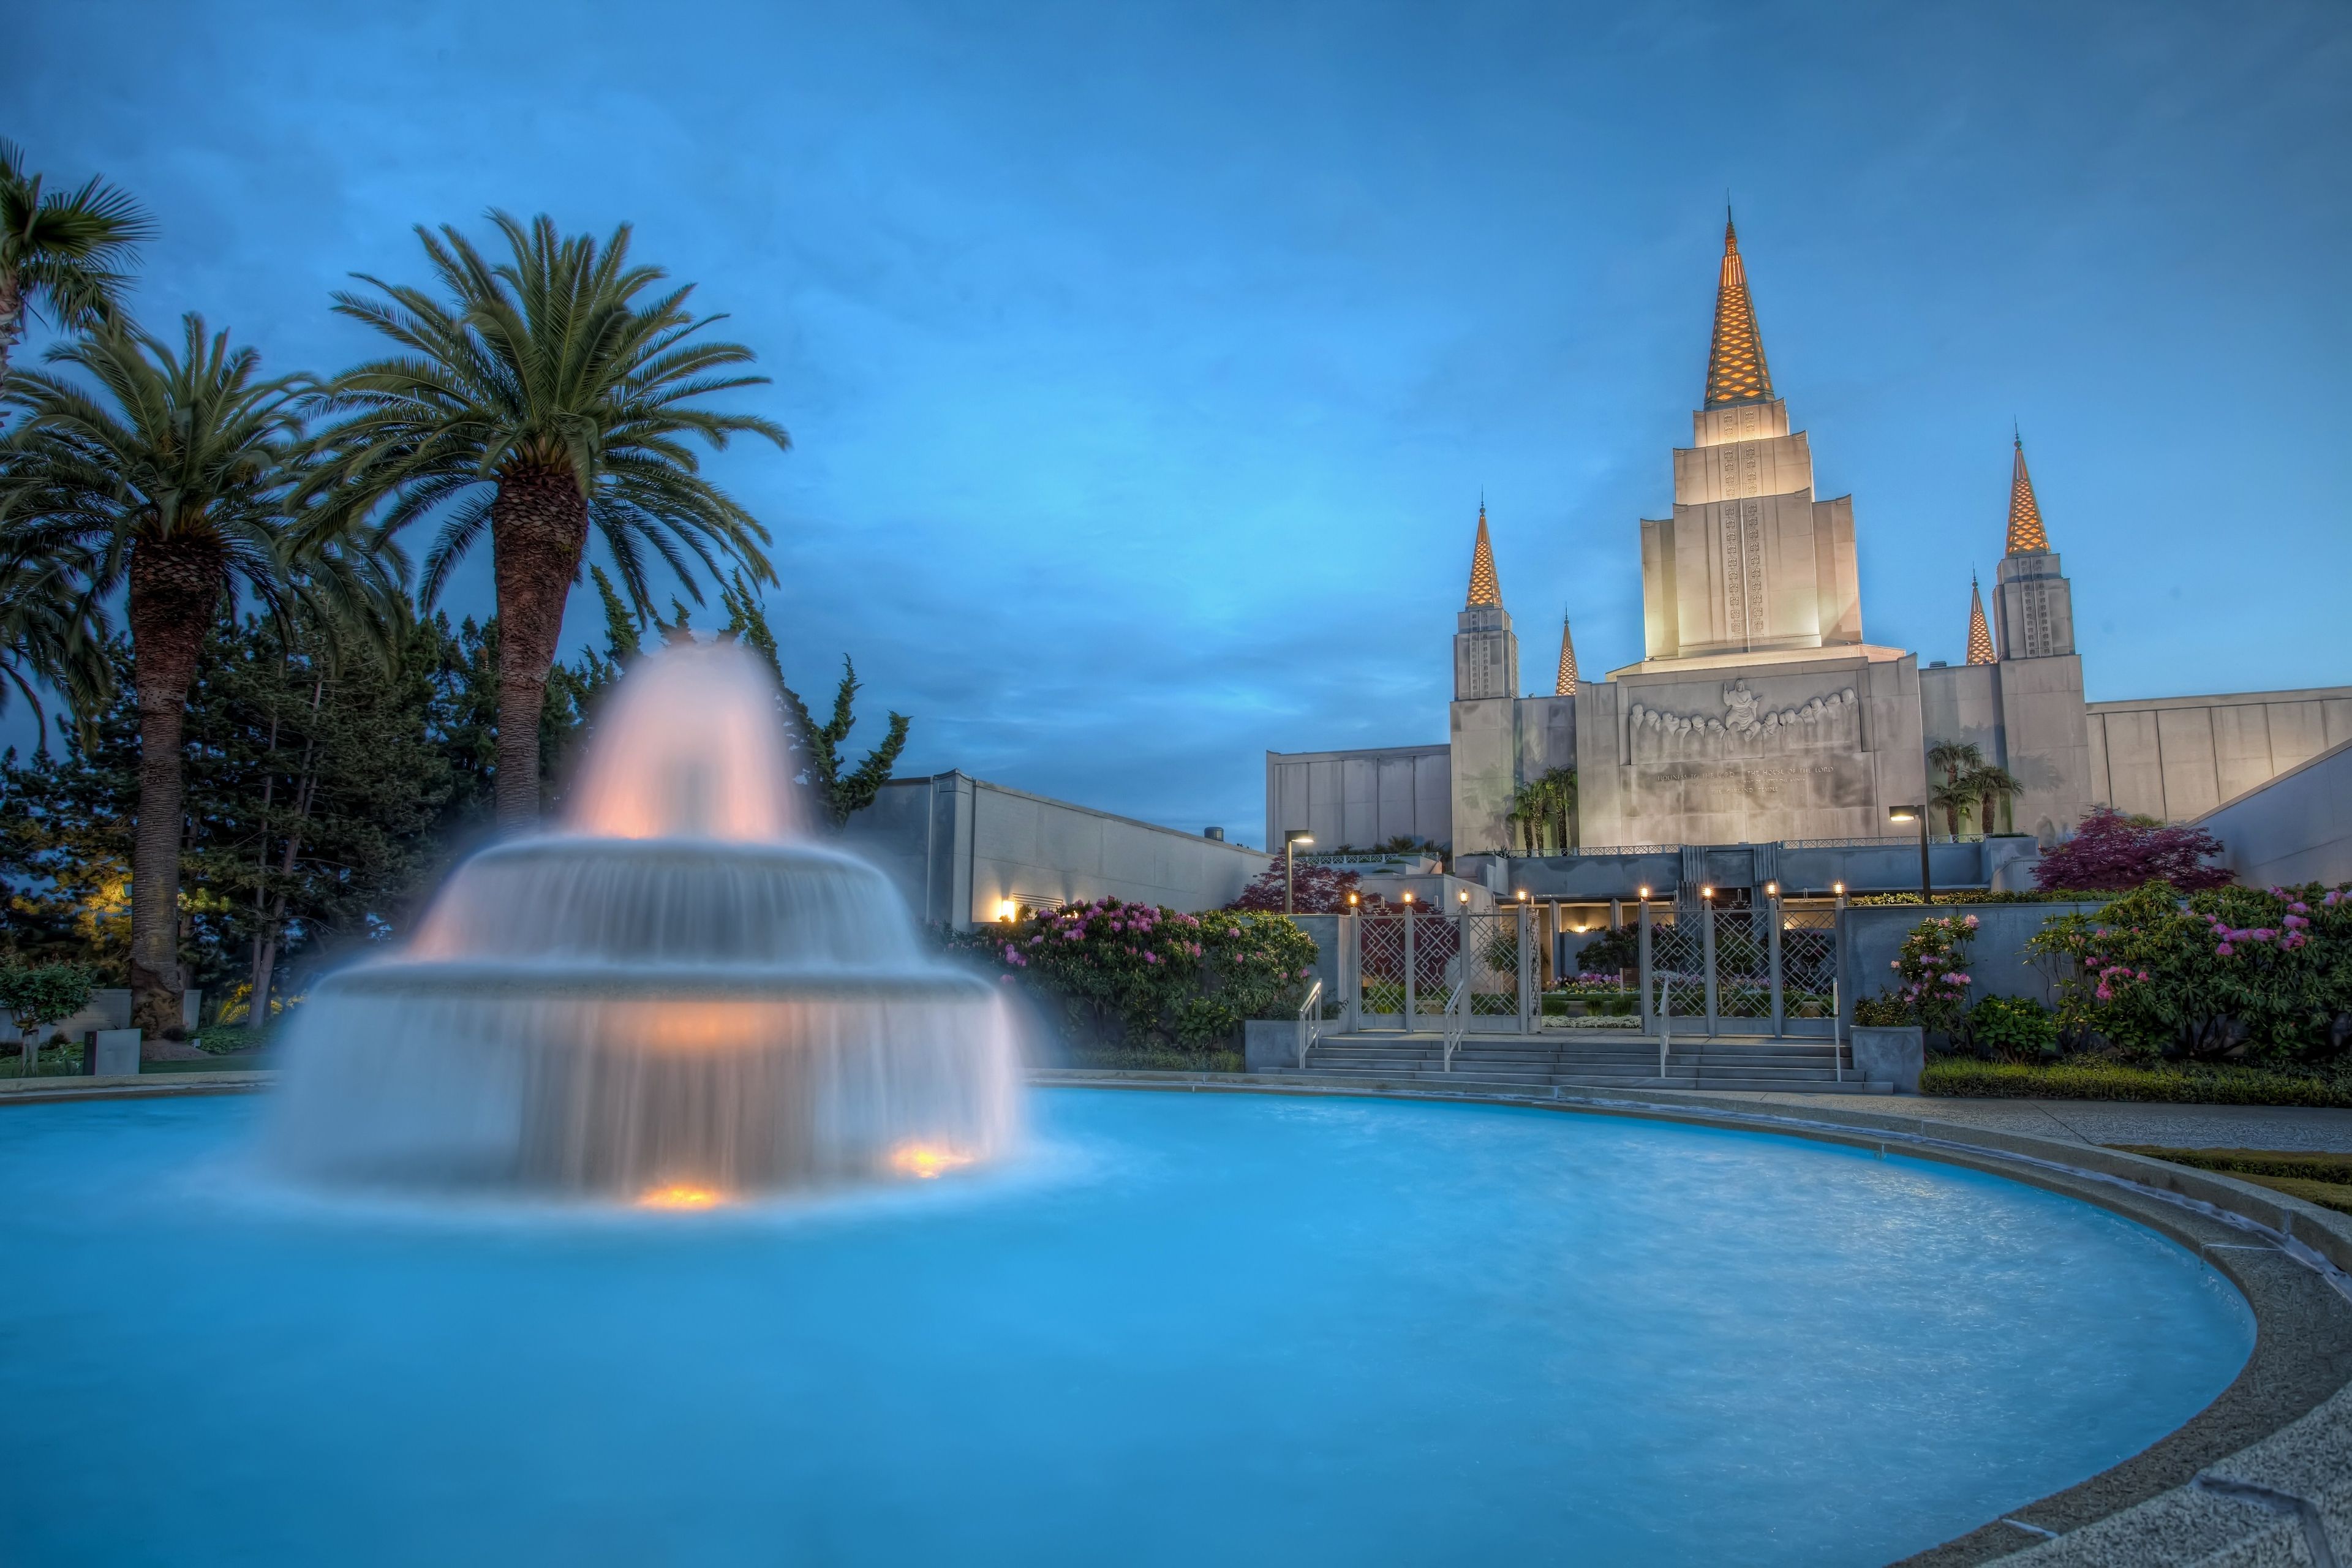 The Oakland California Temple fountain, including the entrance and scenery.